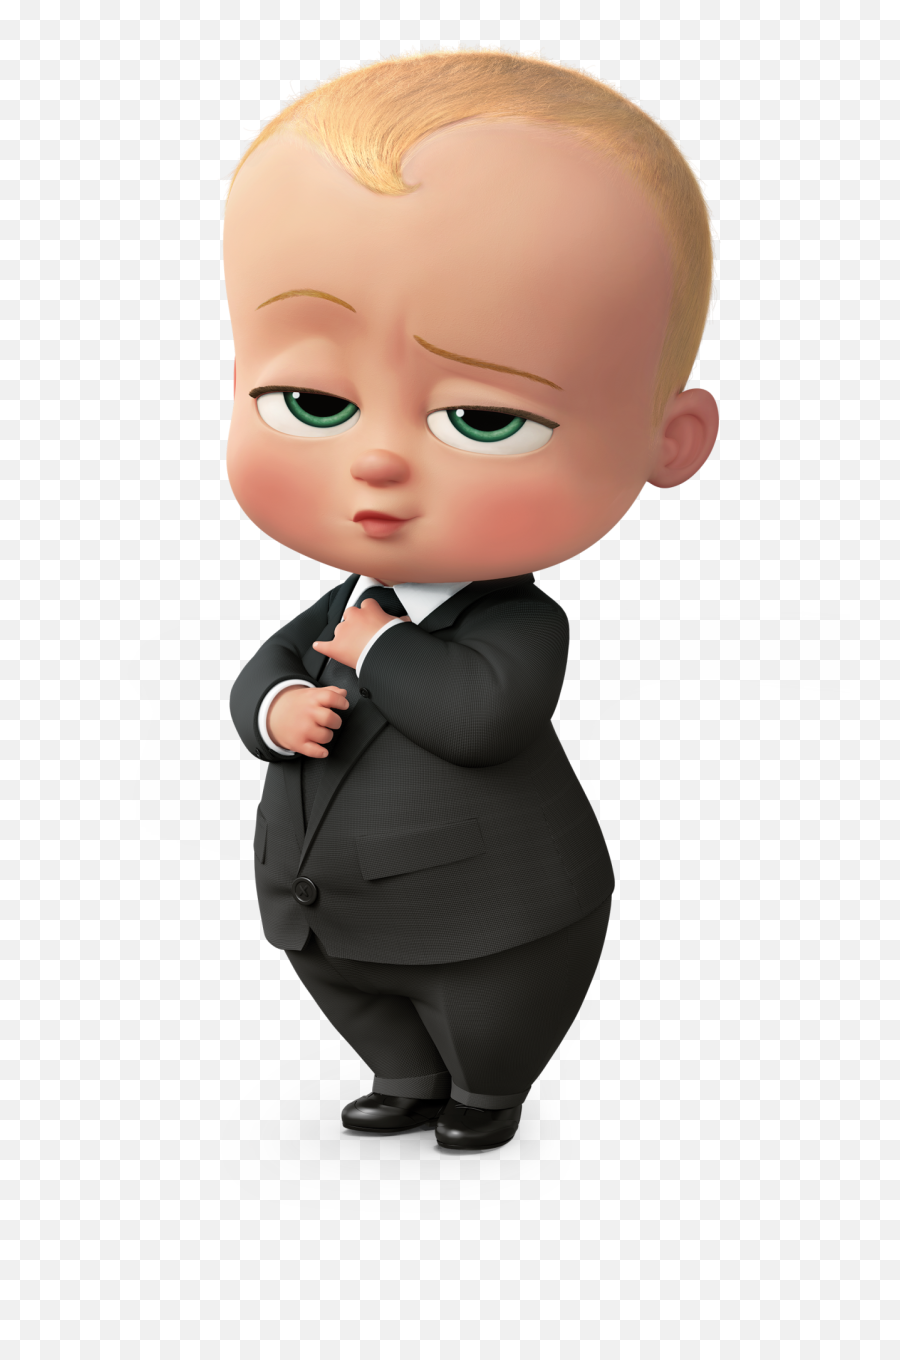 Download Free Png Boss Baby - Boss Baby,Boss Png